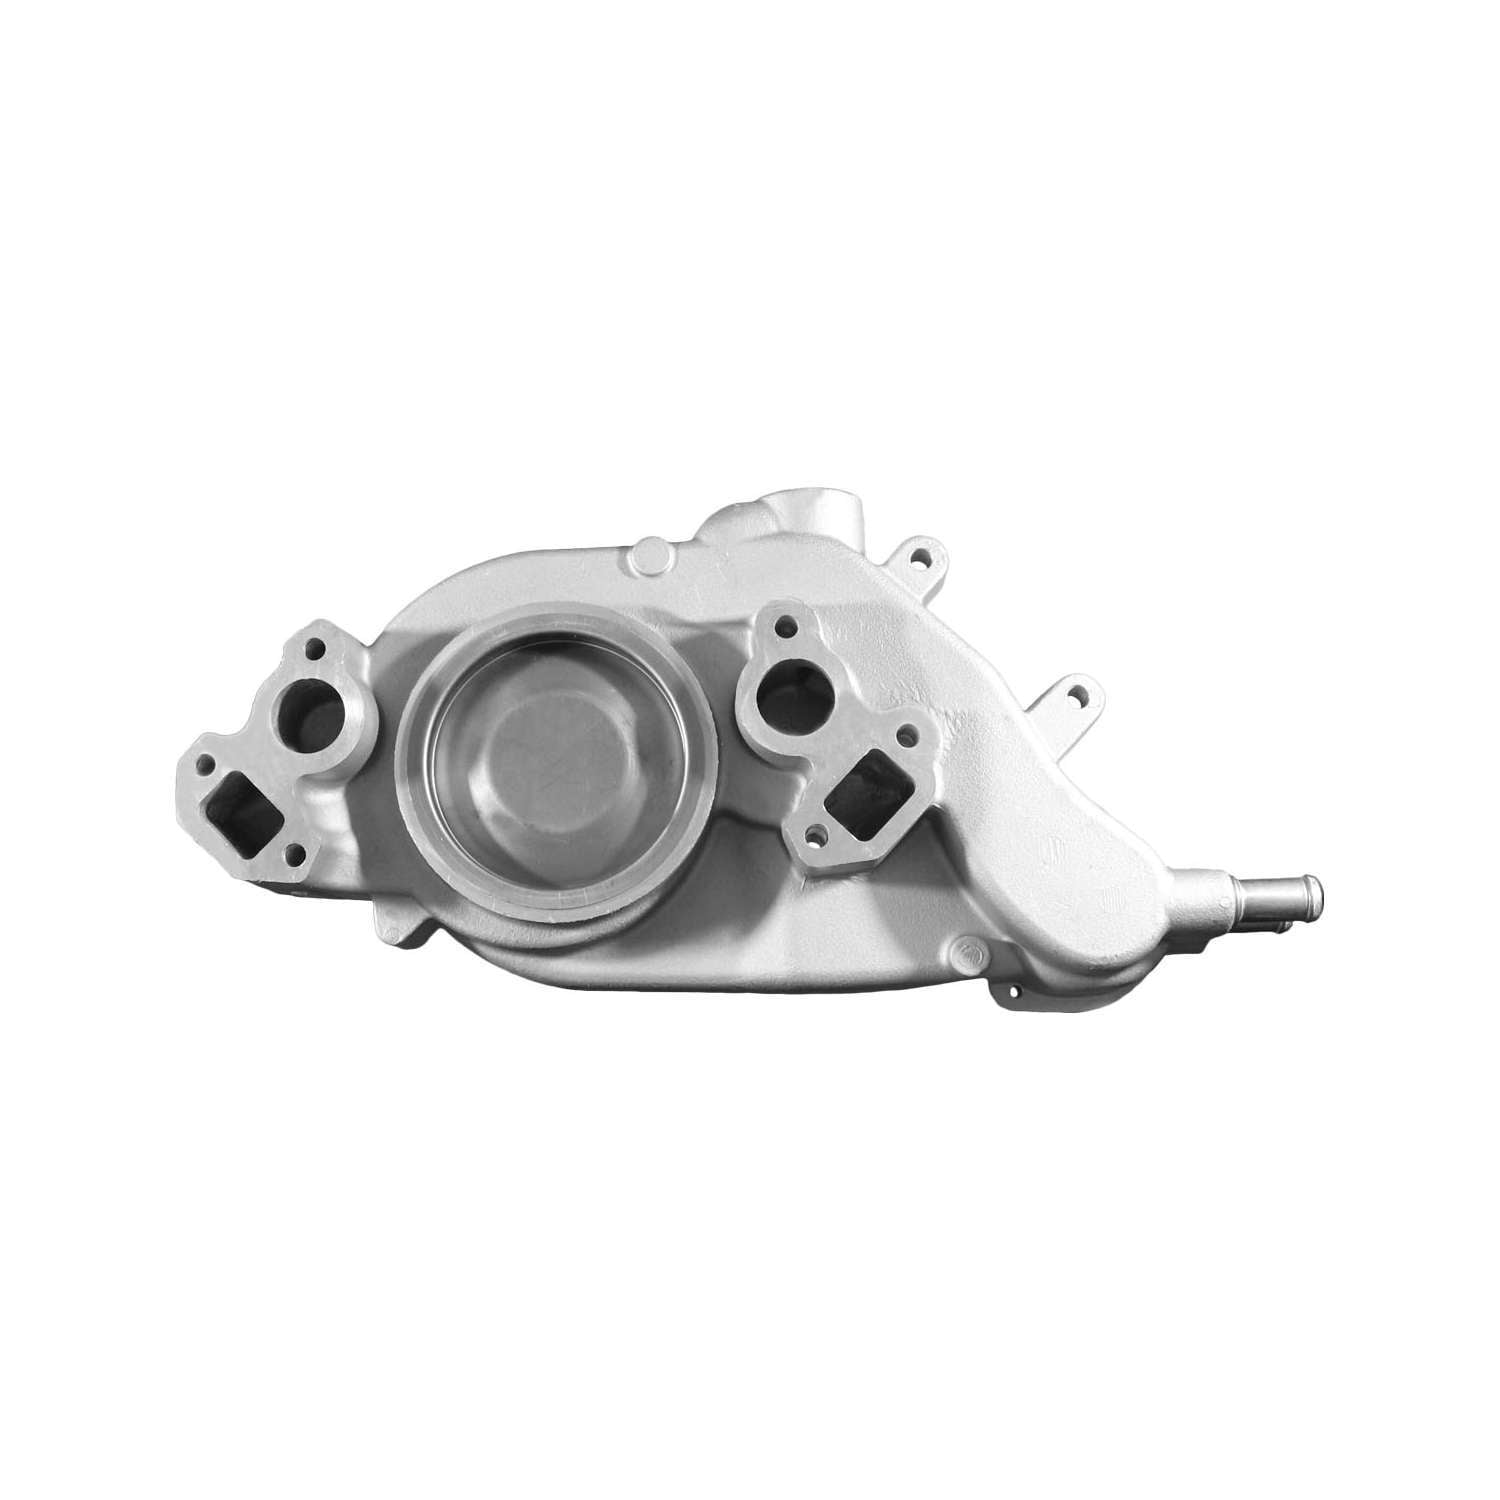 ACDelco Professional 252-846 Engine Water Pump Fits 2004 Chevrolet